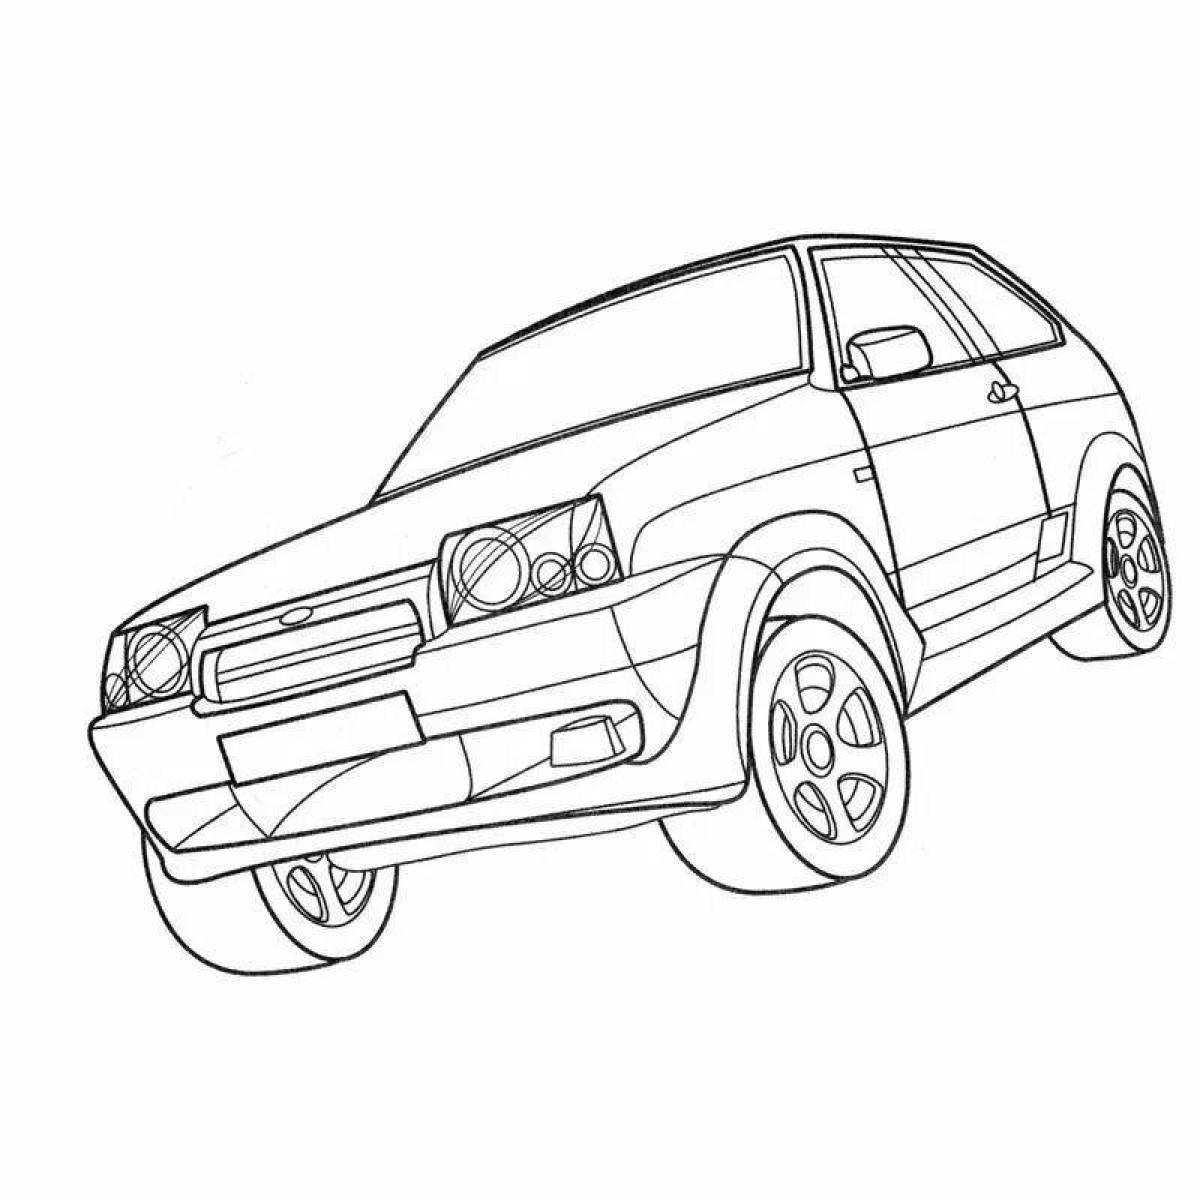 Coloring book exquisite vaz cars